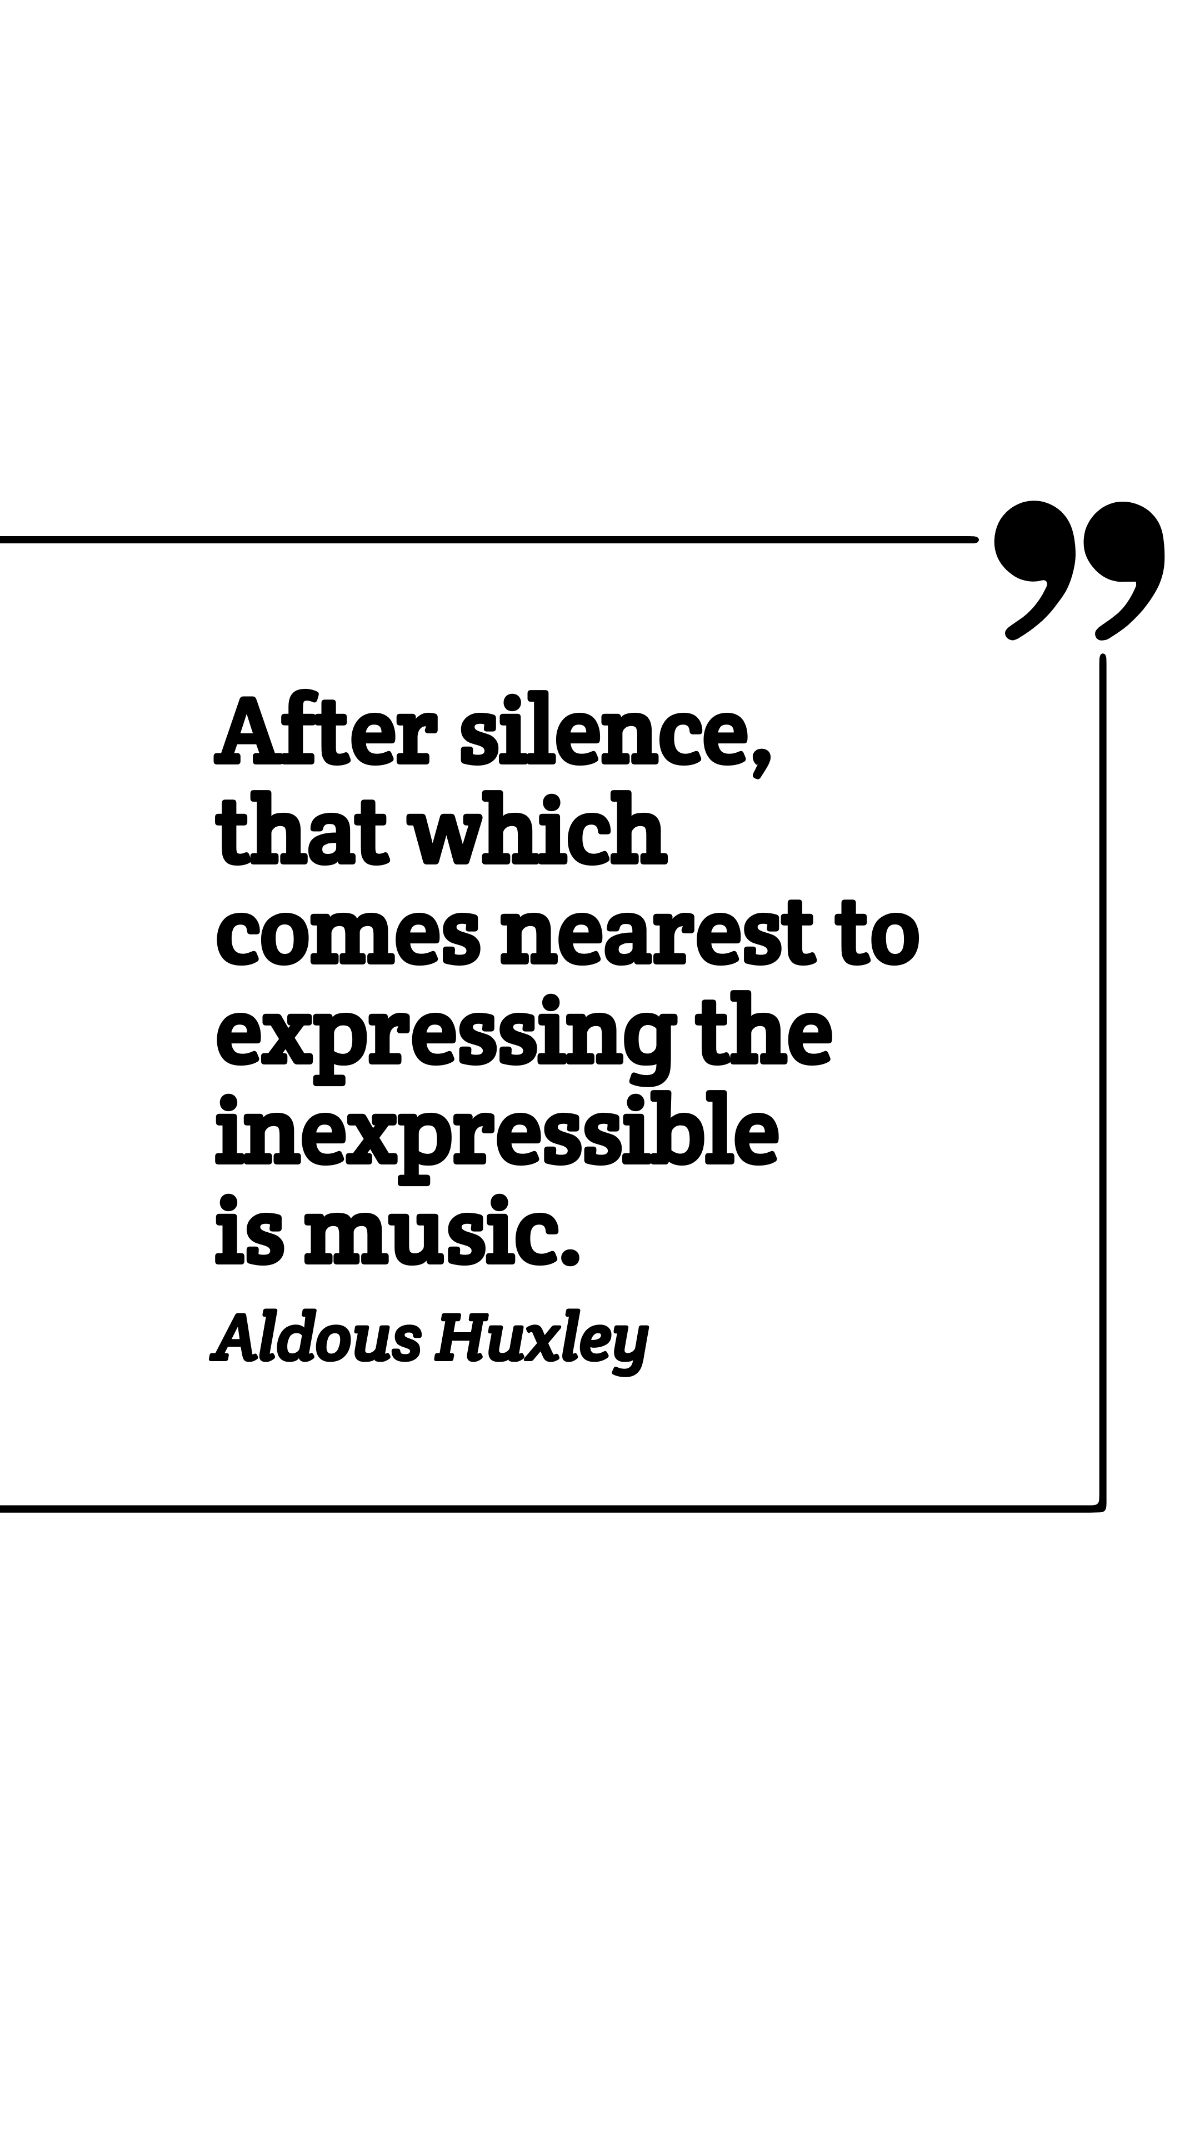 Aldous Huxley - After silence, that which comes nearest to expressing the inexpressible is music. Template